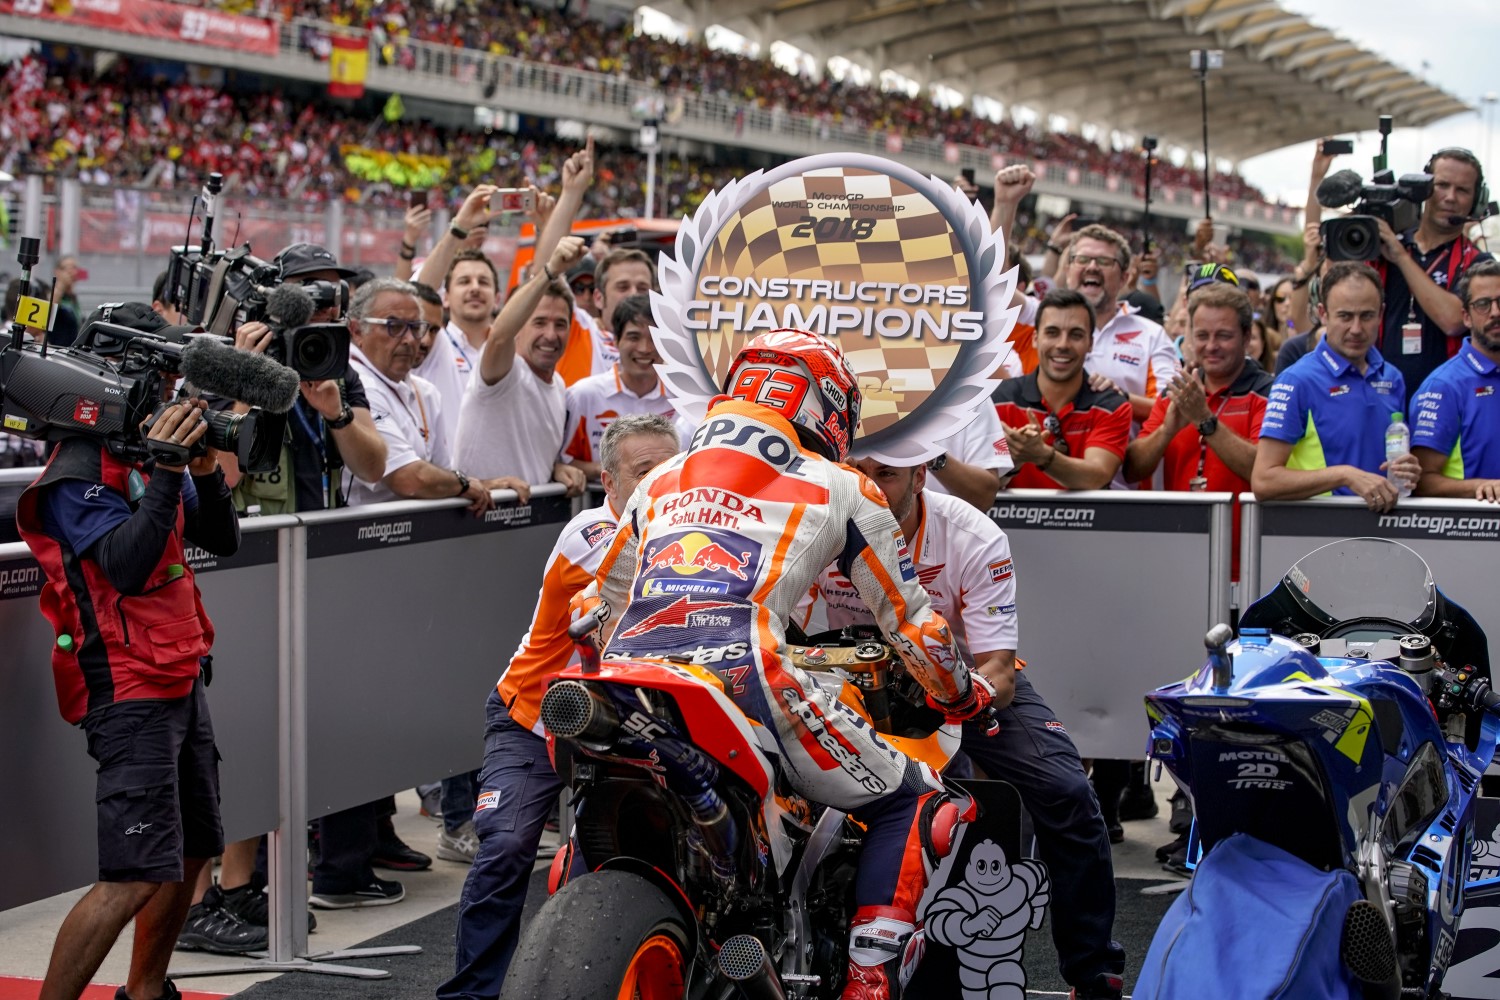 A huge crowd watched Marquez do it again